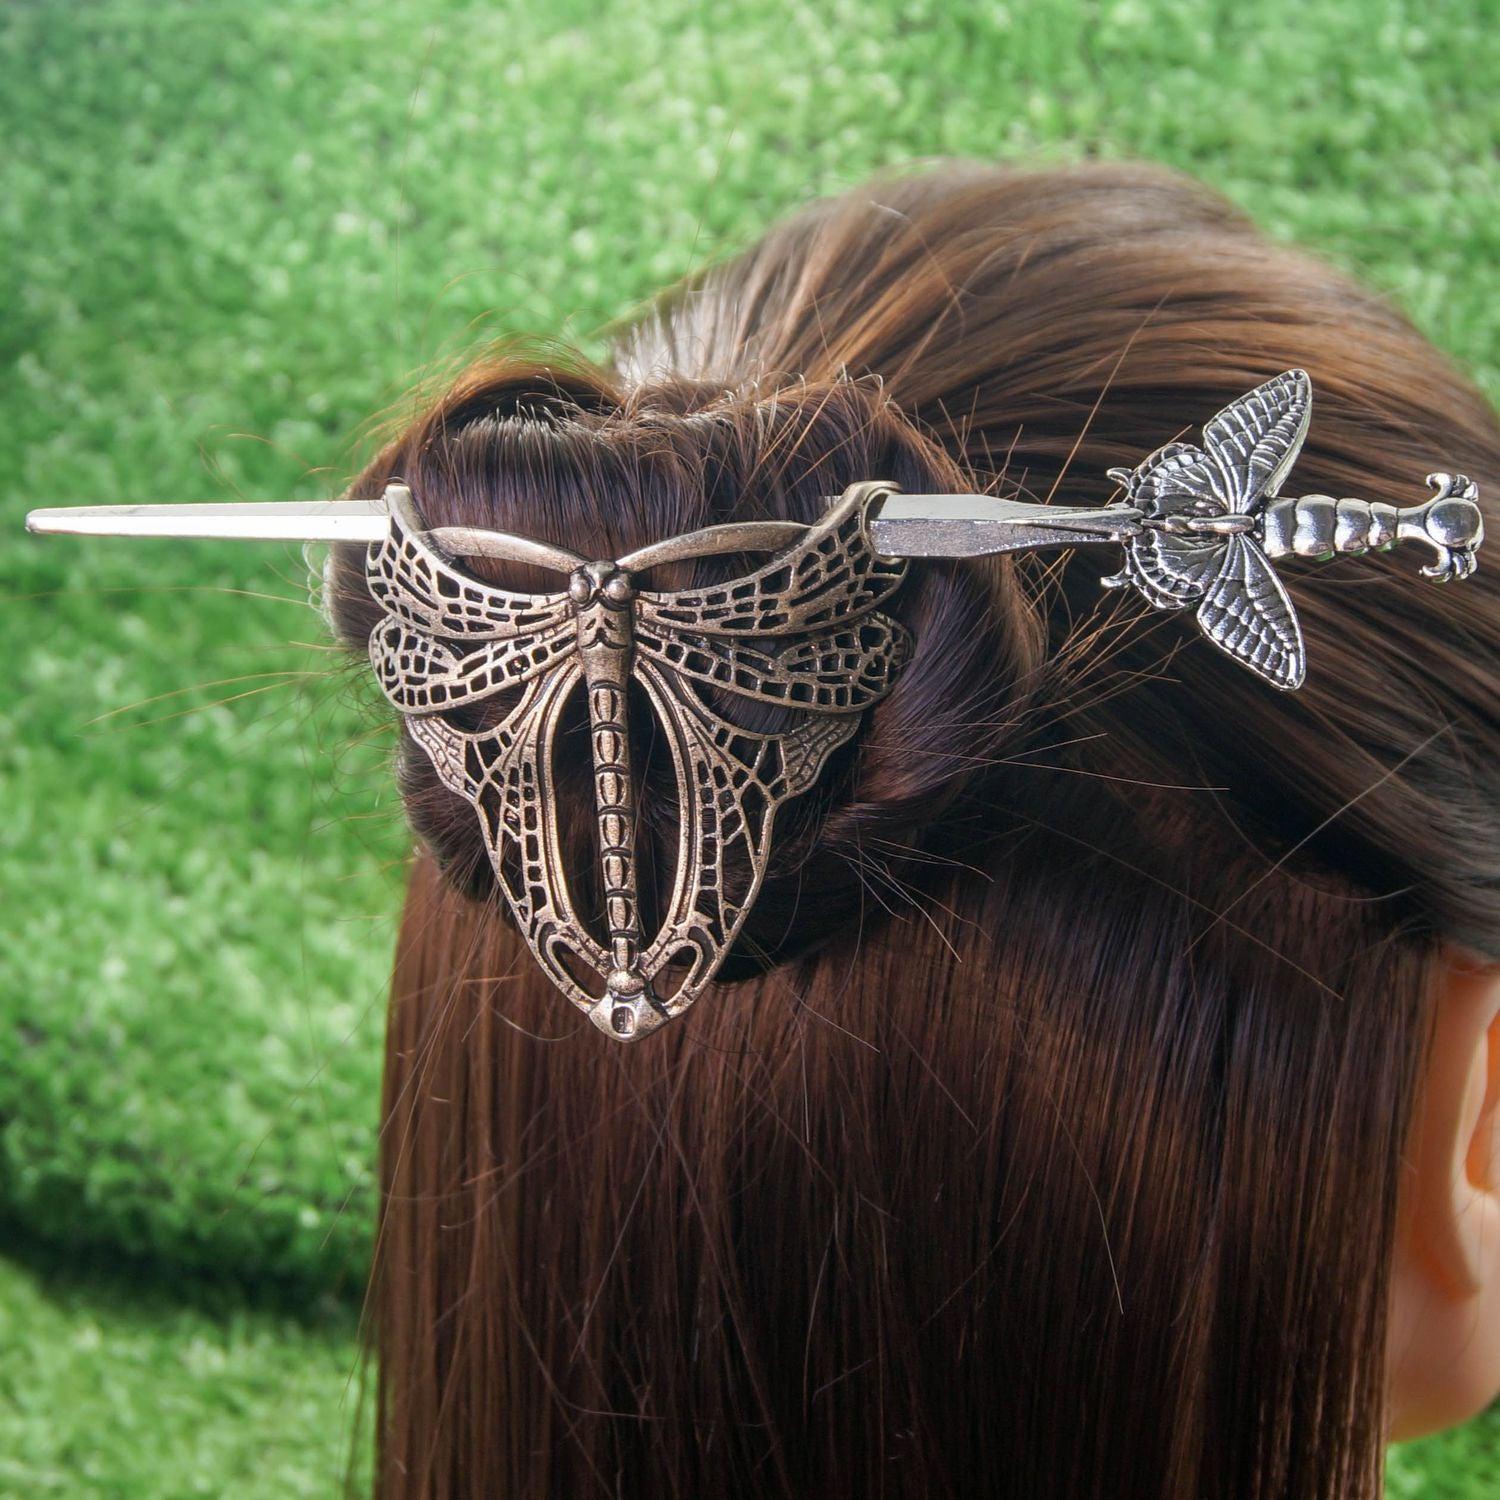 Gothic Dragonfly Hair Stick Wicca Pagan Hair Accessories-MoonChildWorld